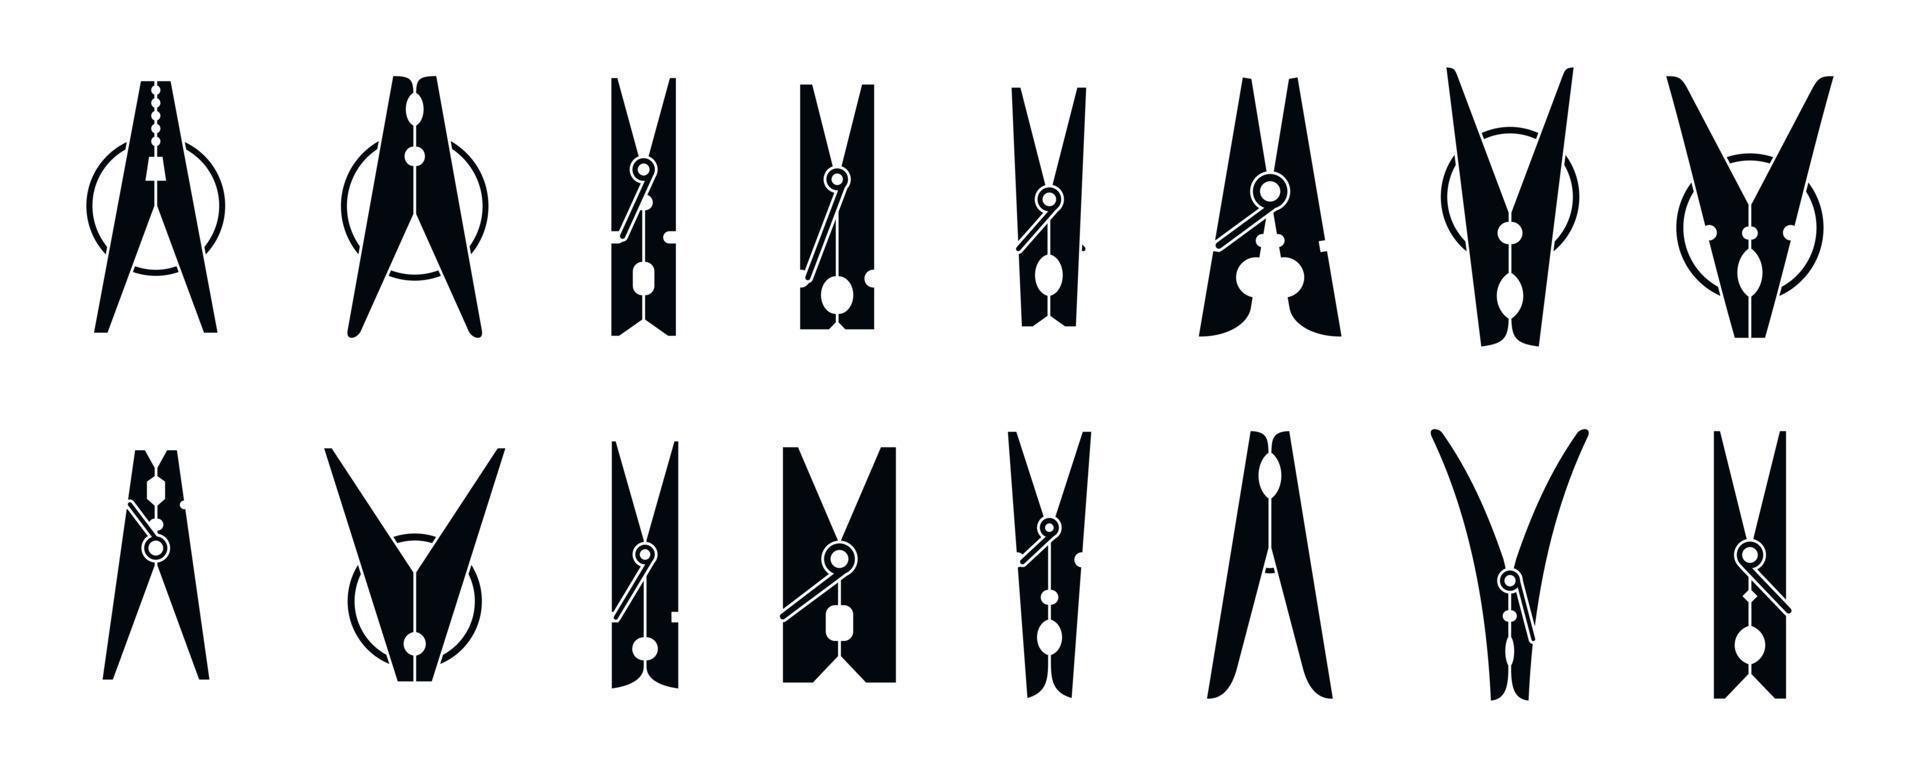 Home clothes pins icons set, simple style vector